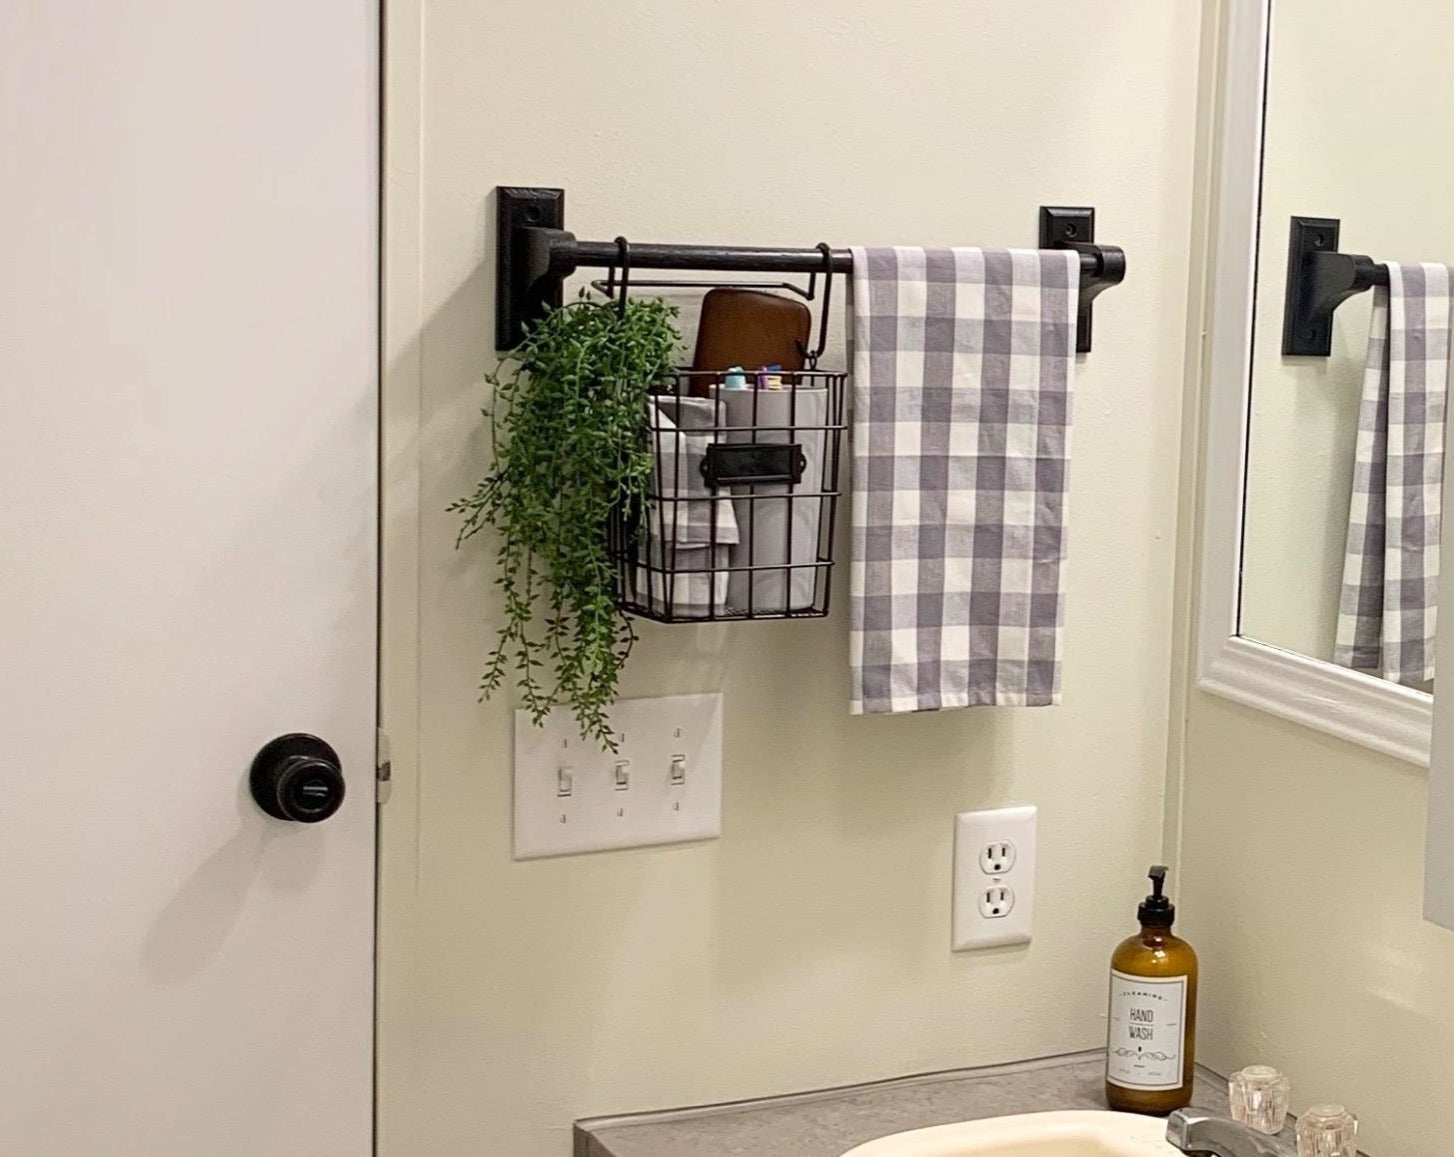 The basket hung from a towel bar and holding a variety of items as well as a plant